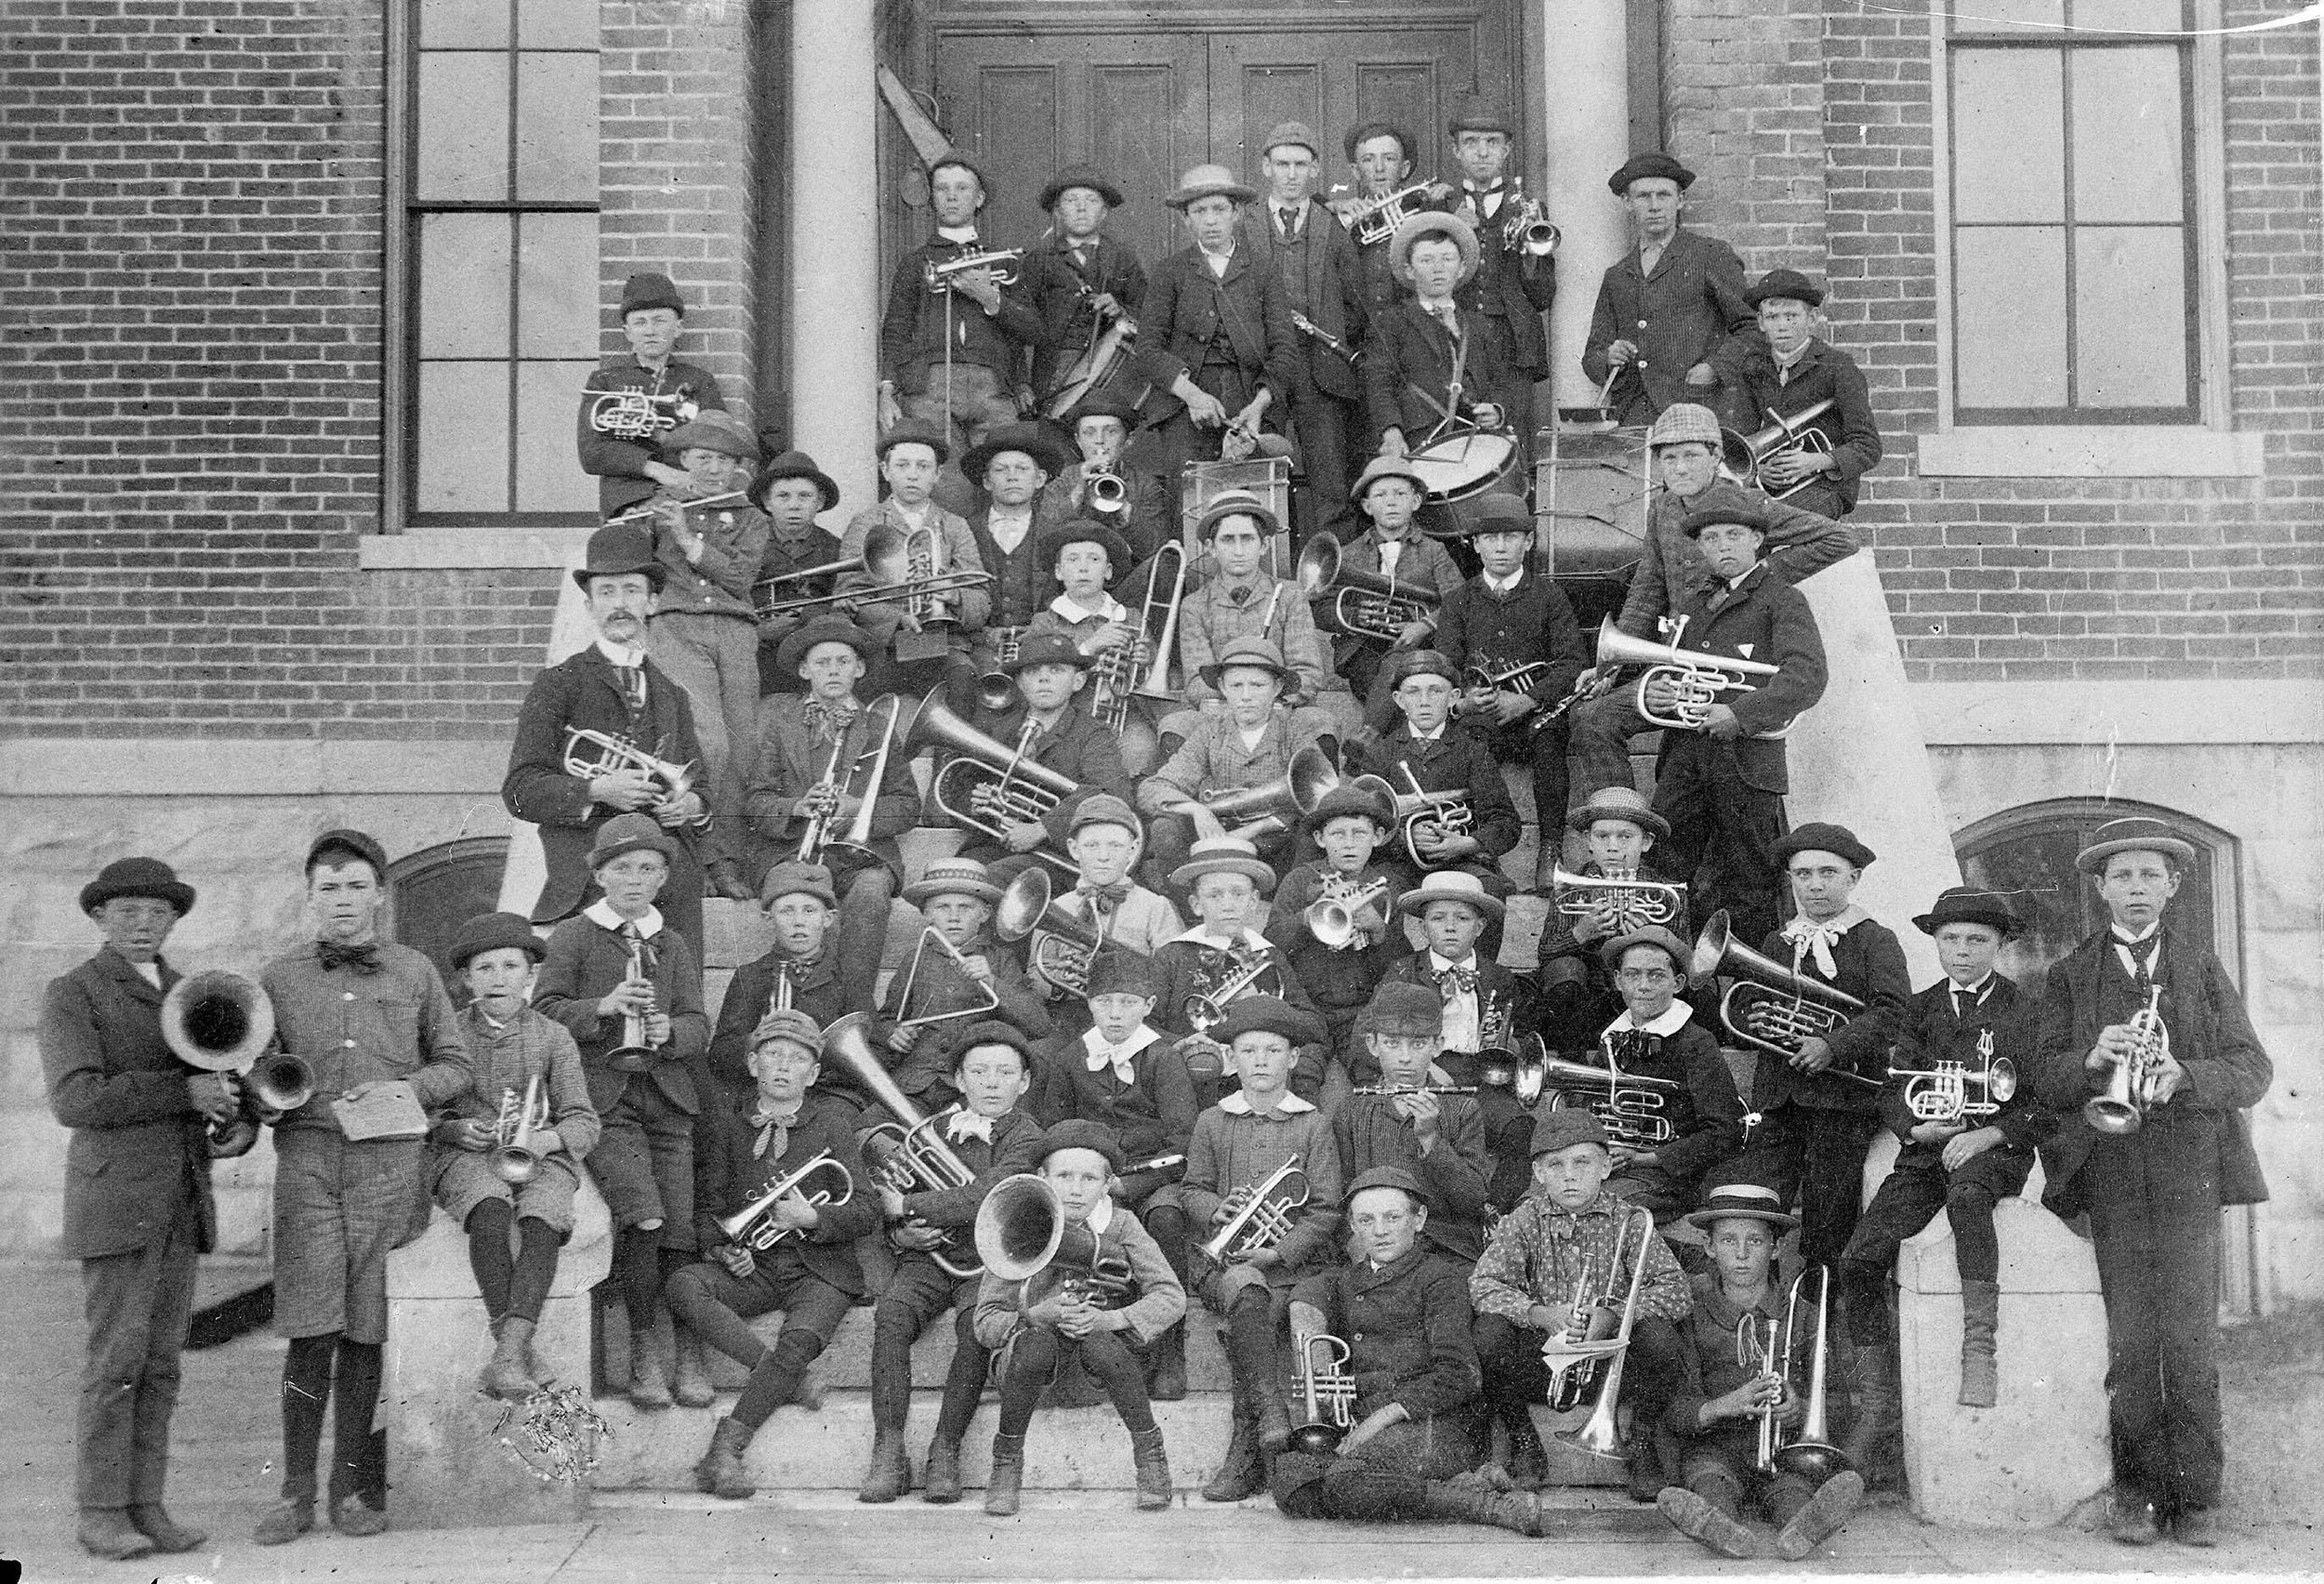 The State Industrial School Band, pictured in 1904. (Library of Congress)